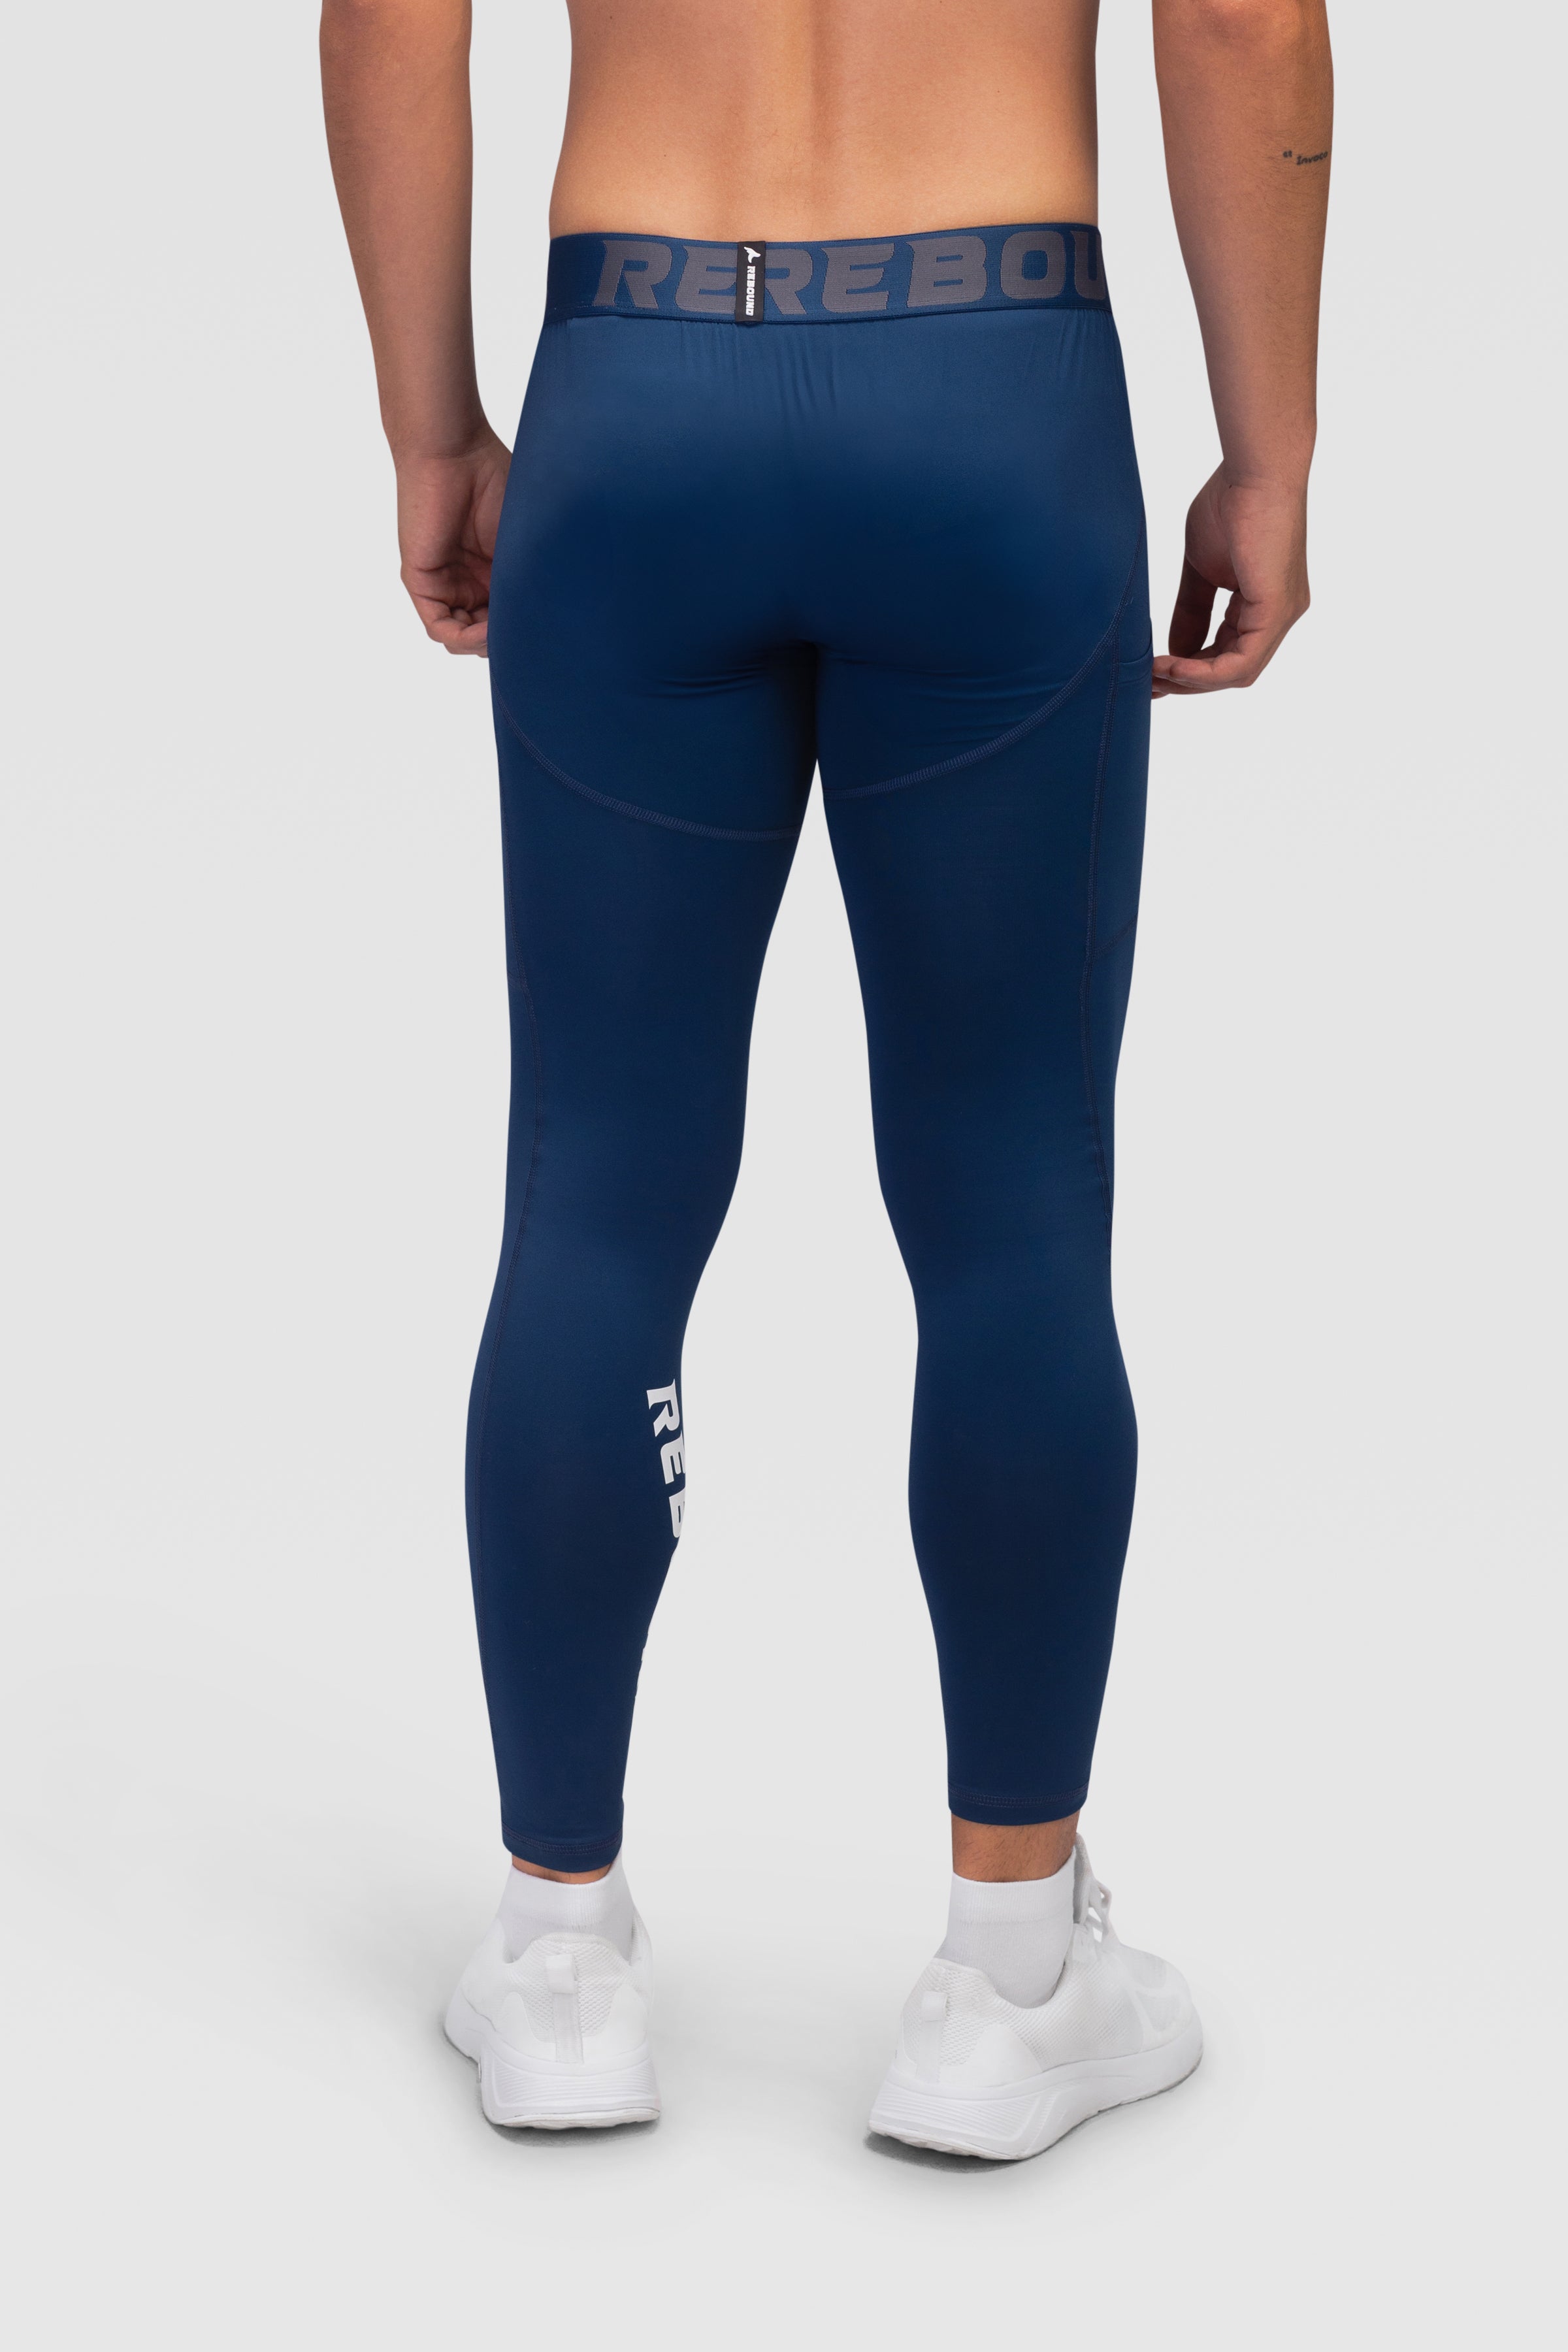 Mens Full Length Tights Reconnect - Ocean